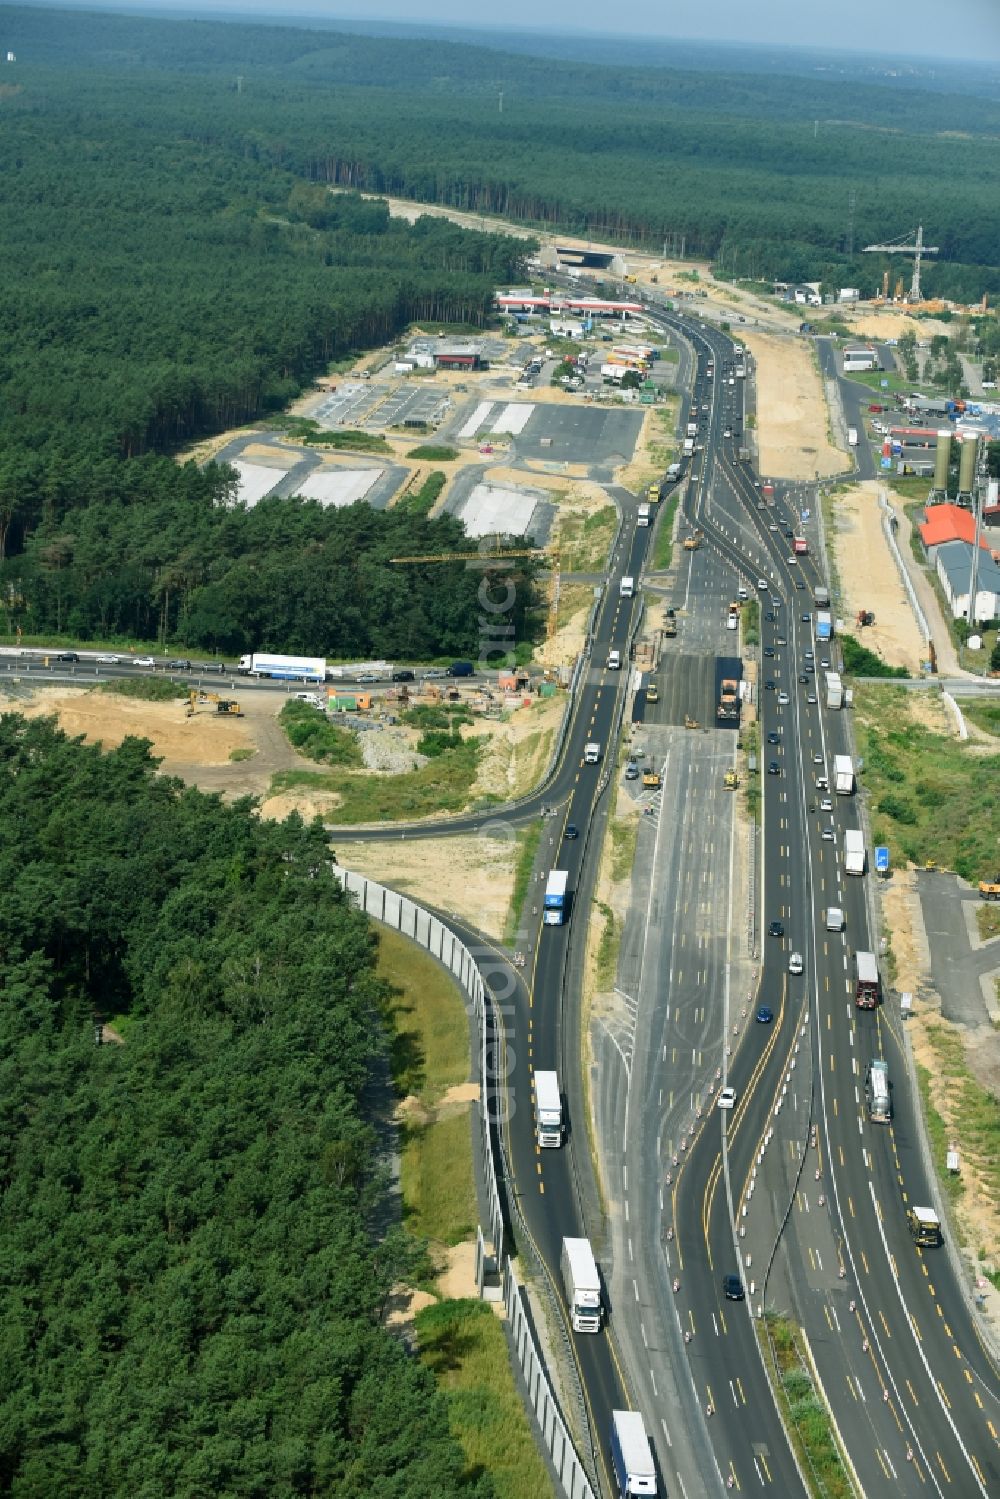 Aerial photograph Michendorf - Motorway Construction and wheel spacers along the route of the motorway A10 to 8-lane track extension in Michendorf in Brandenburg